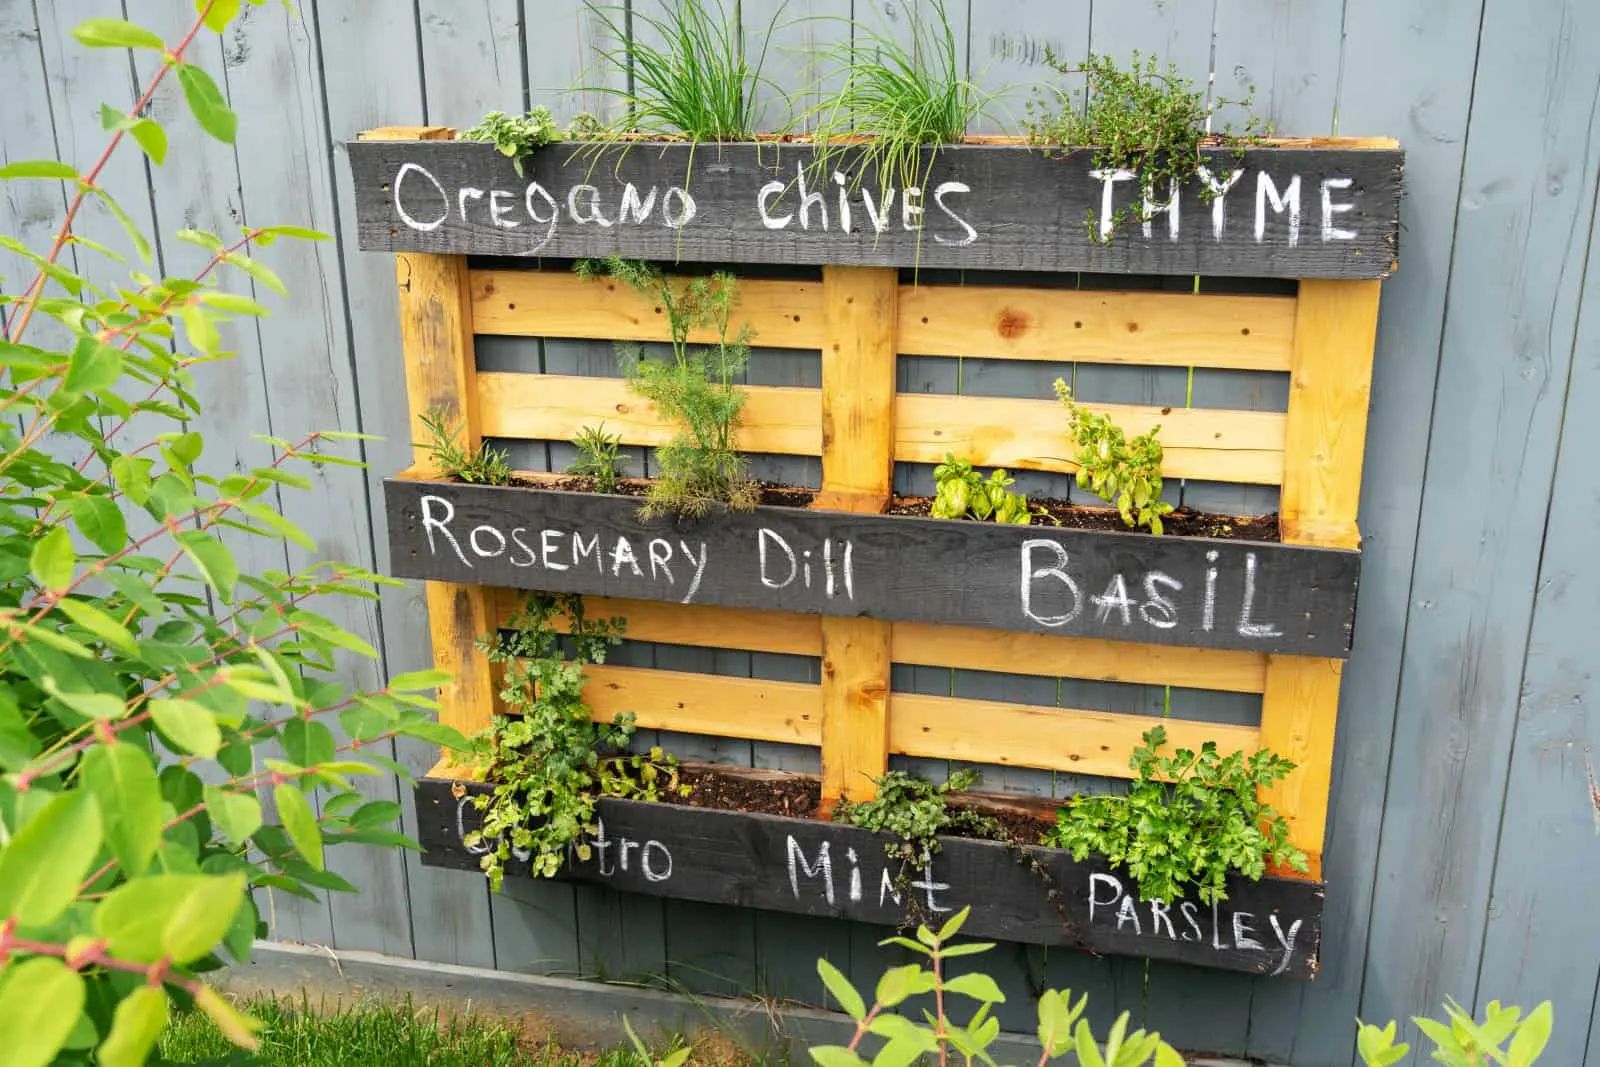 Creative wood herb planter made of wooden pallets